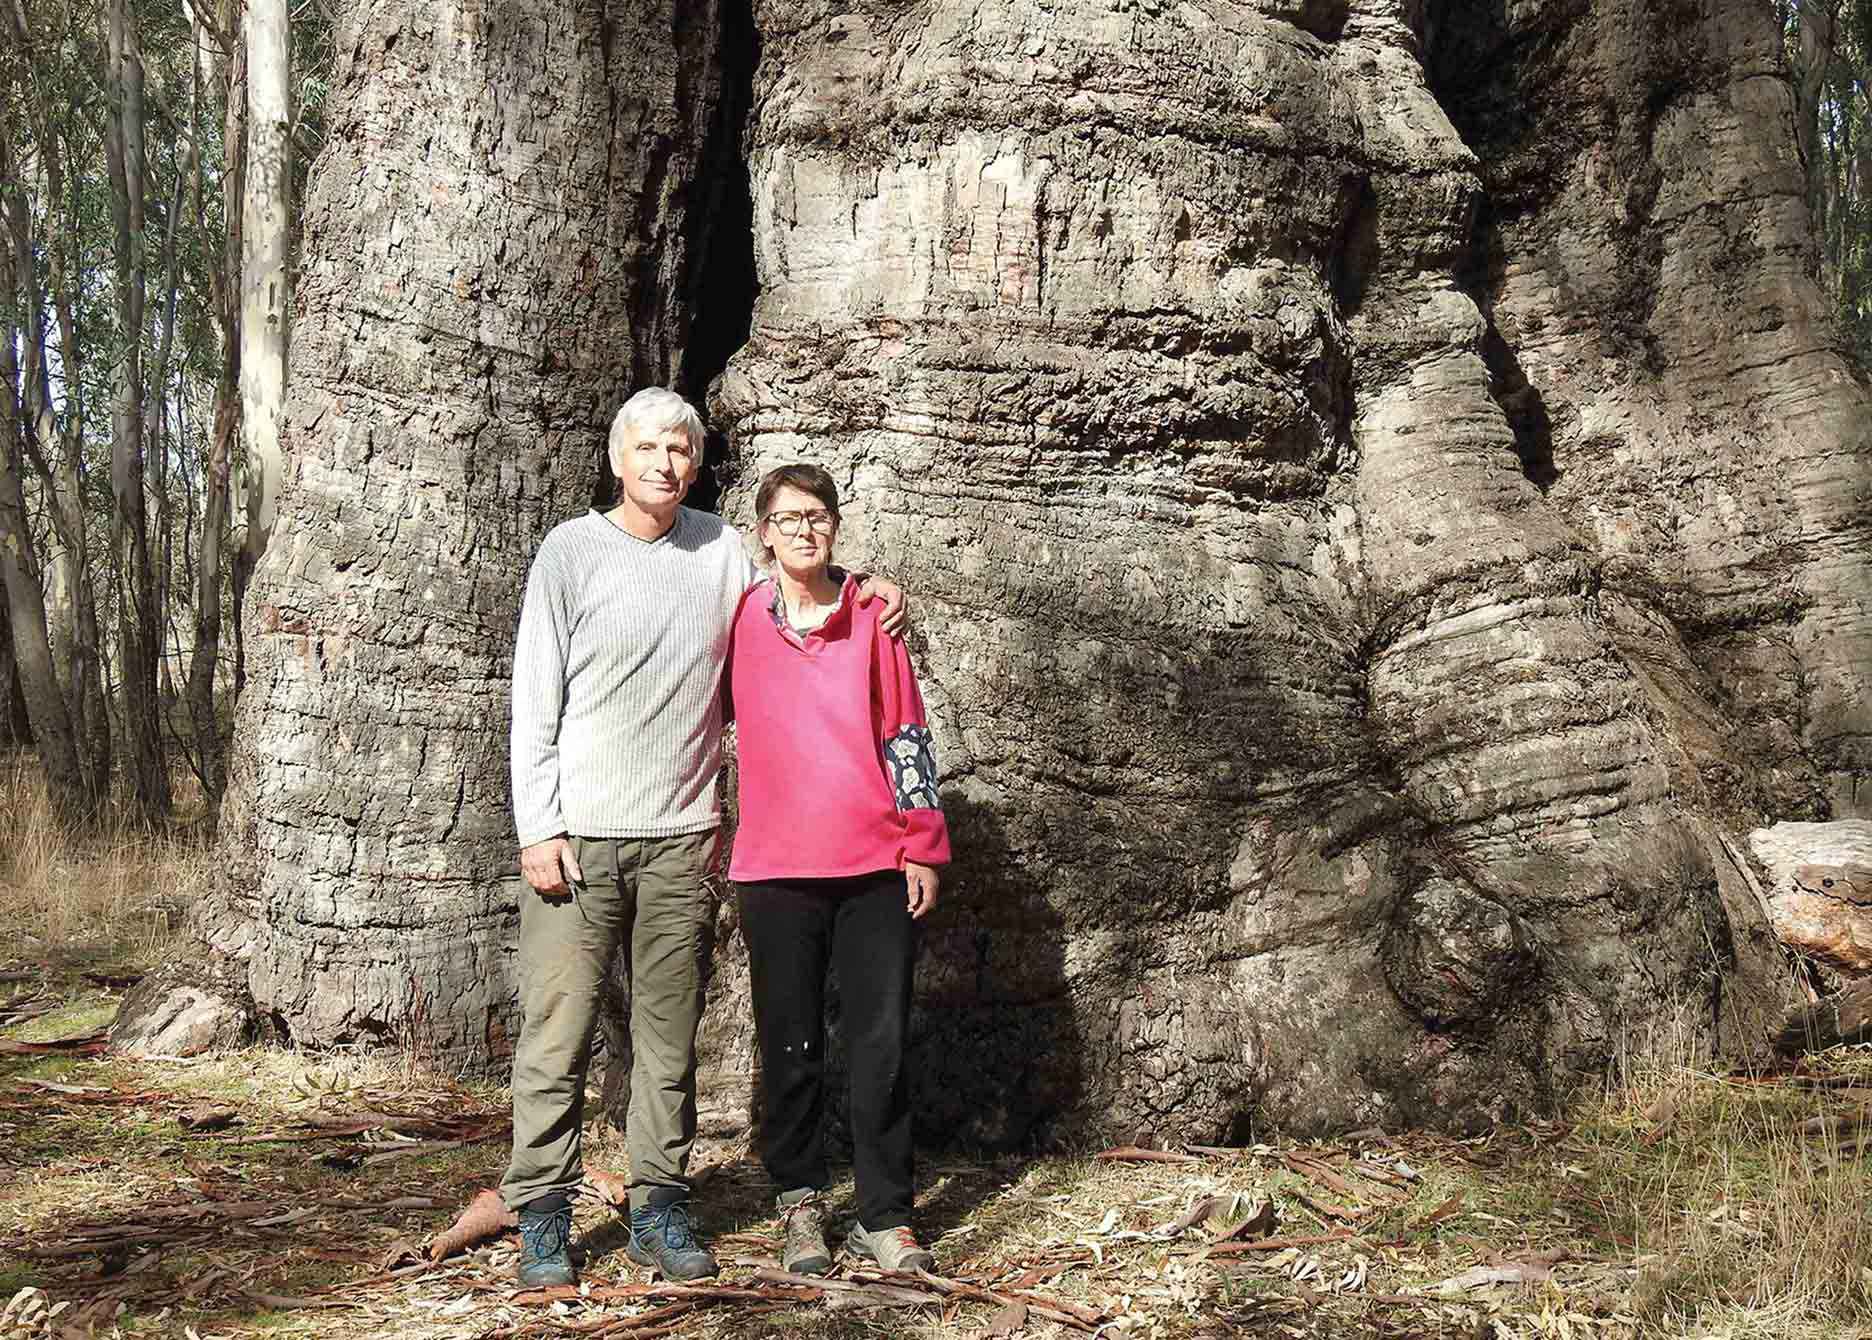 Clive and Catherine Carlyle with the joint largest measured river red gum in Australia on their property at Fyans Creek.